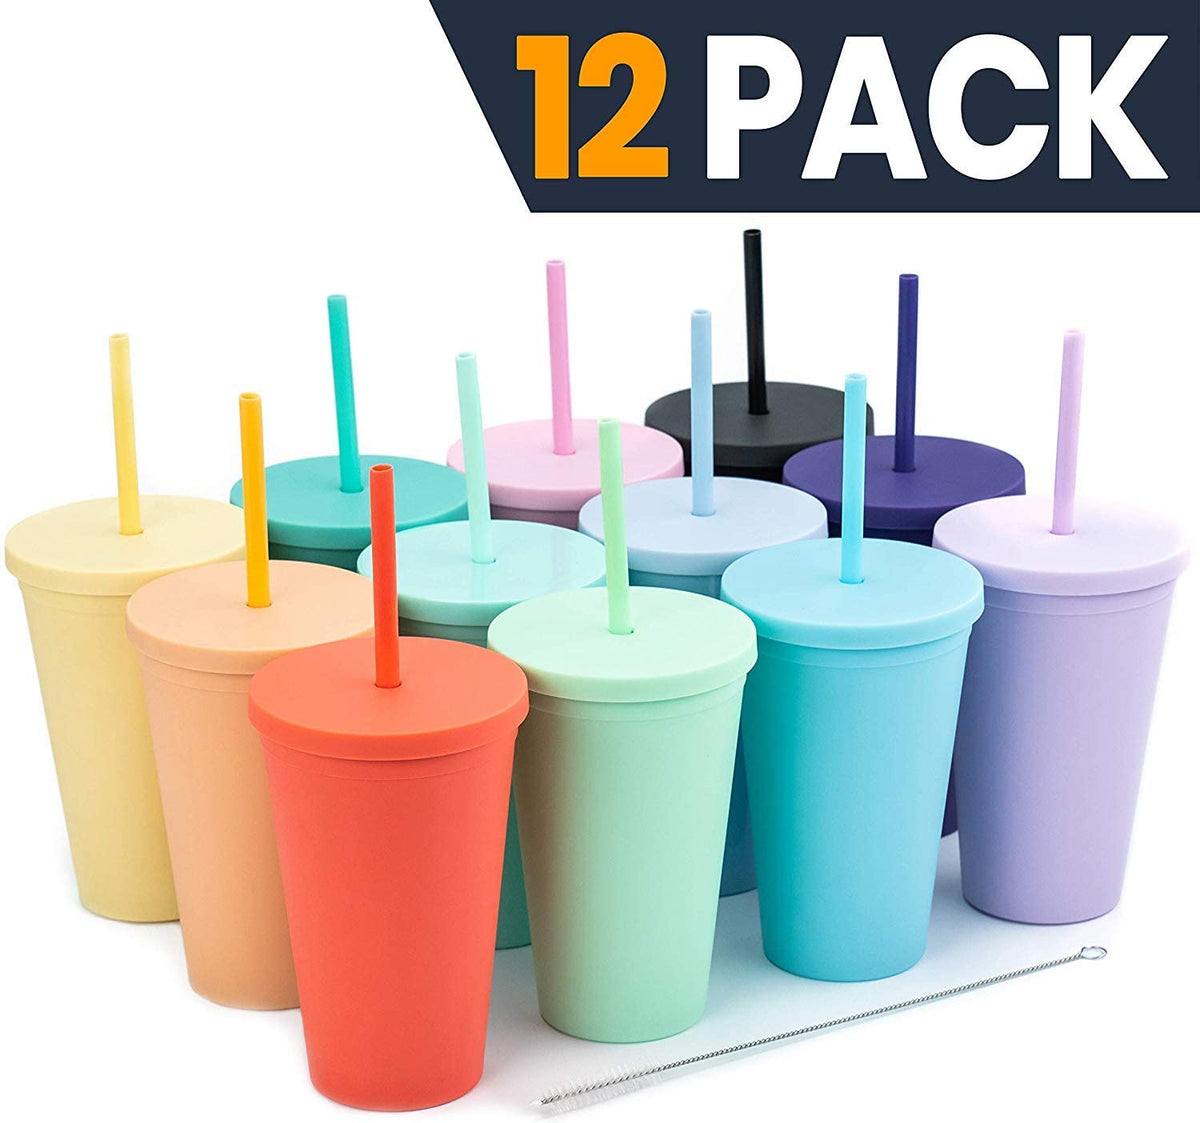 STRATA CUPS Multicolor Skinny Tumblers with Lids and Straws (12 pack) -  16oz